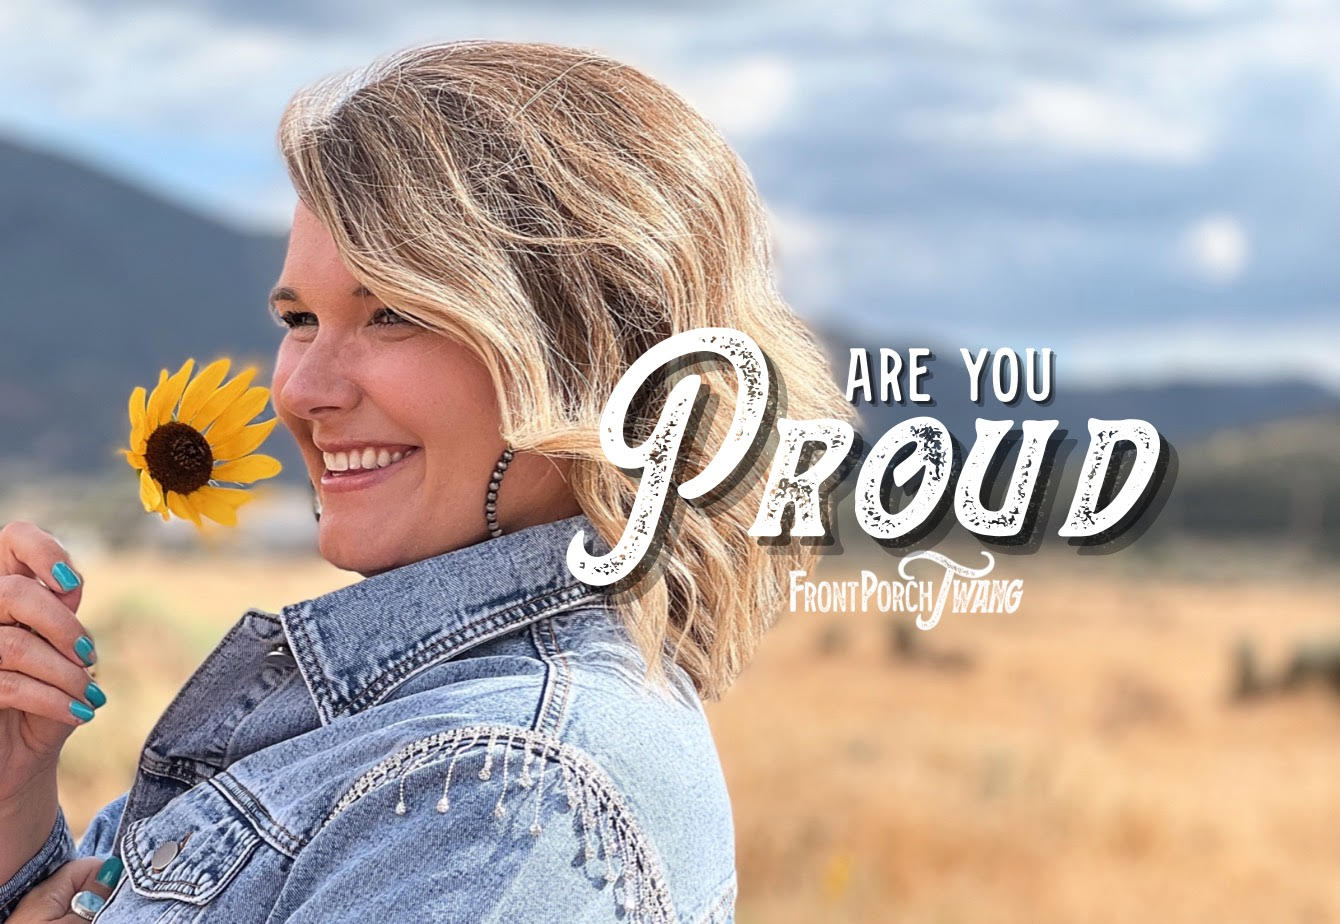 Are You Proud Of Yourself?